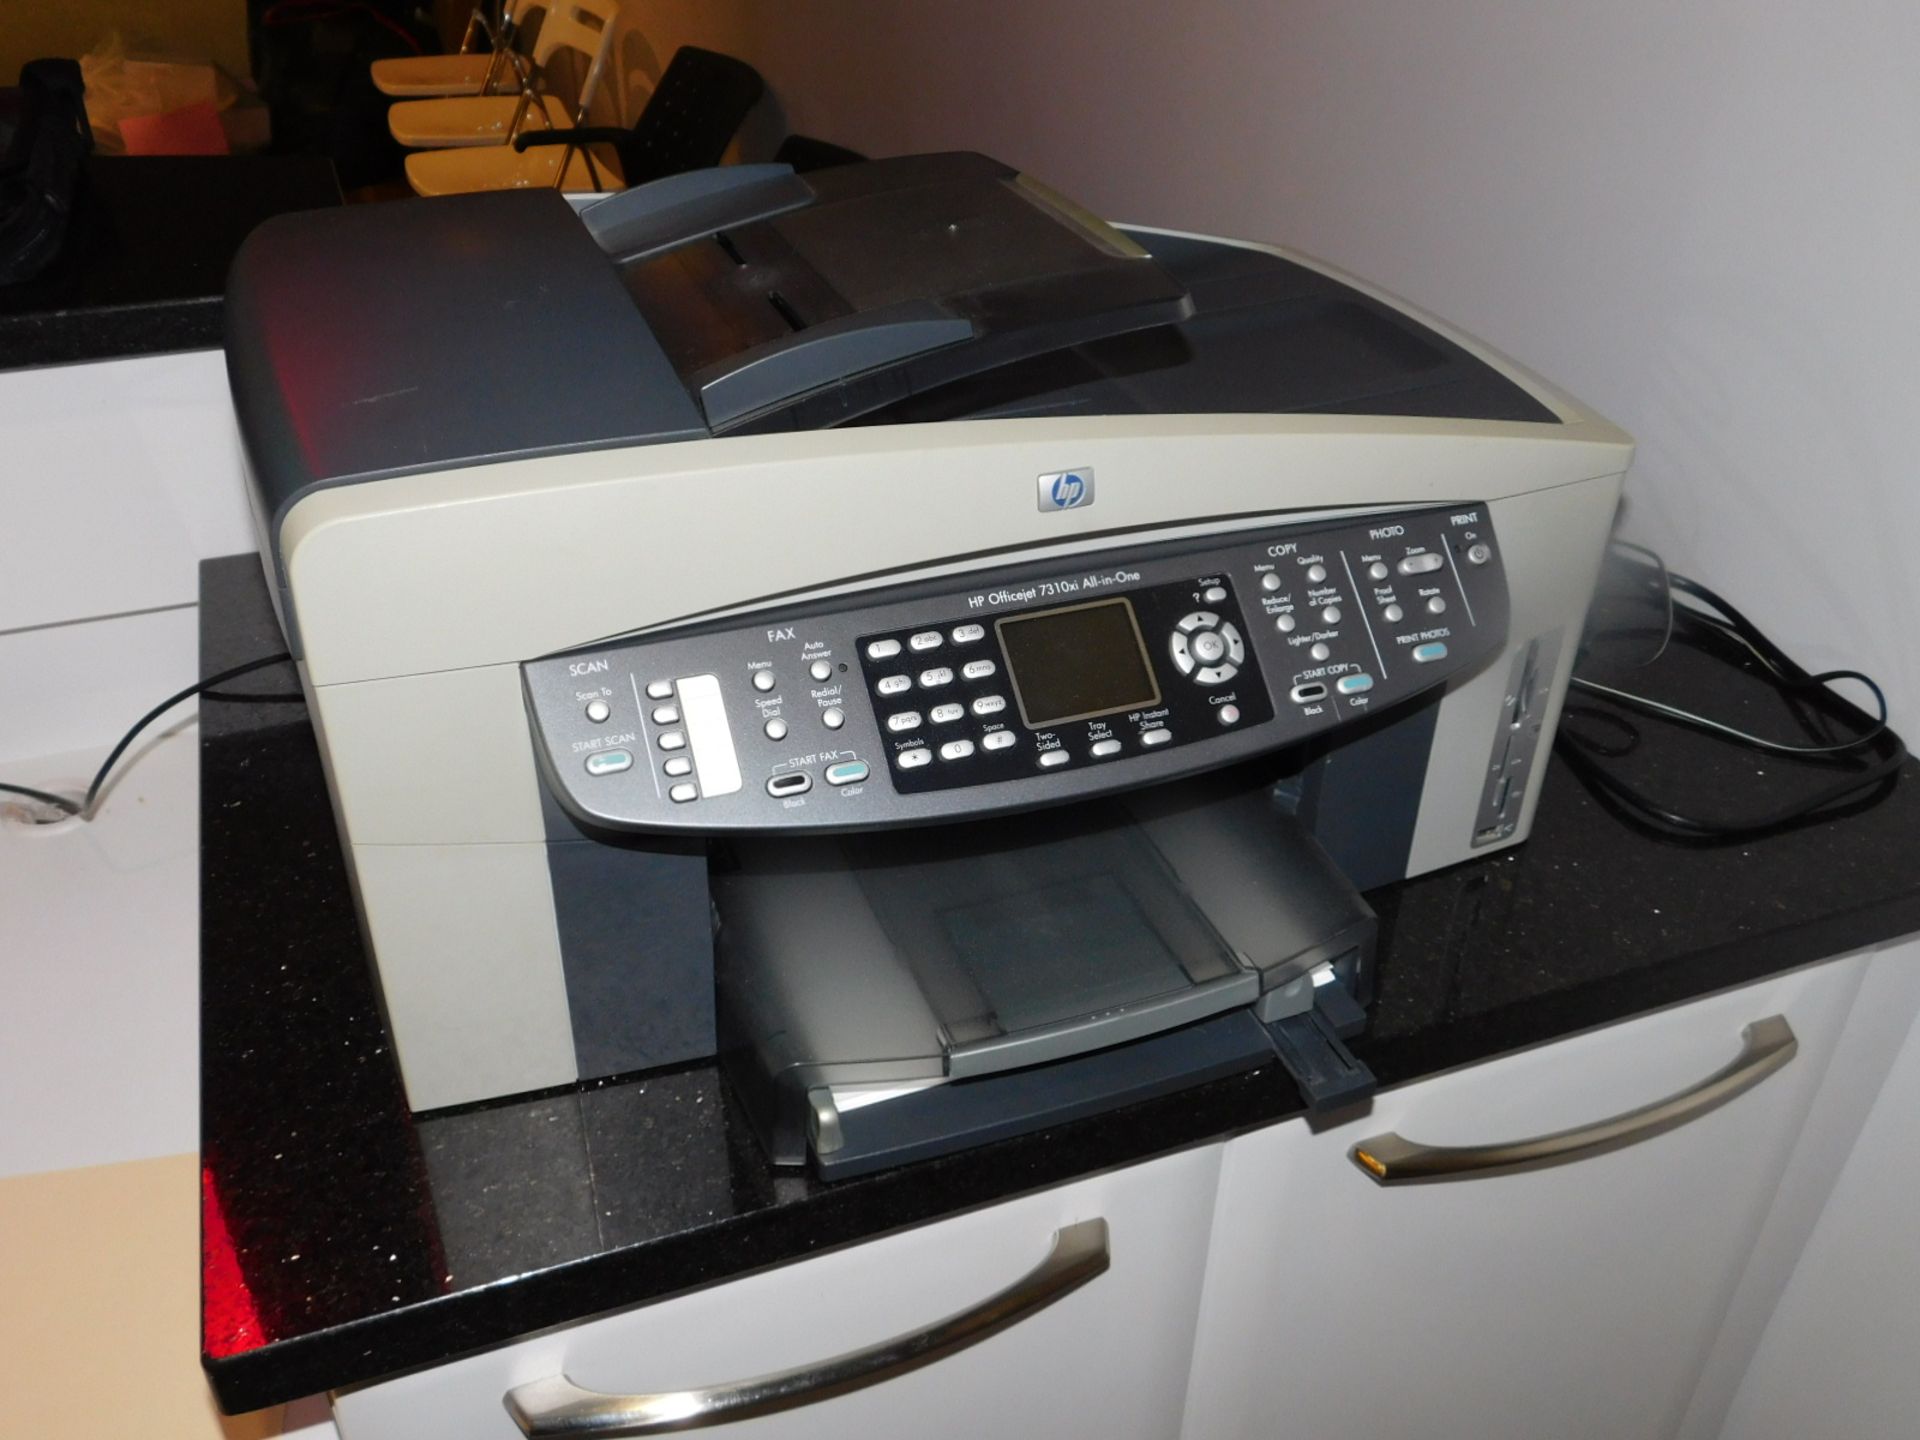 HP 7310 ALL IN ONE COPIER, PRINTER AND FAX